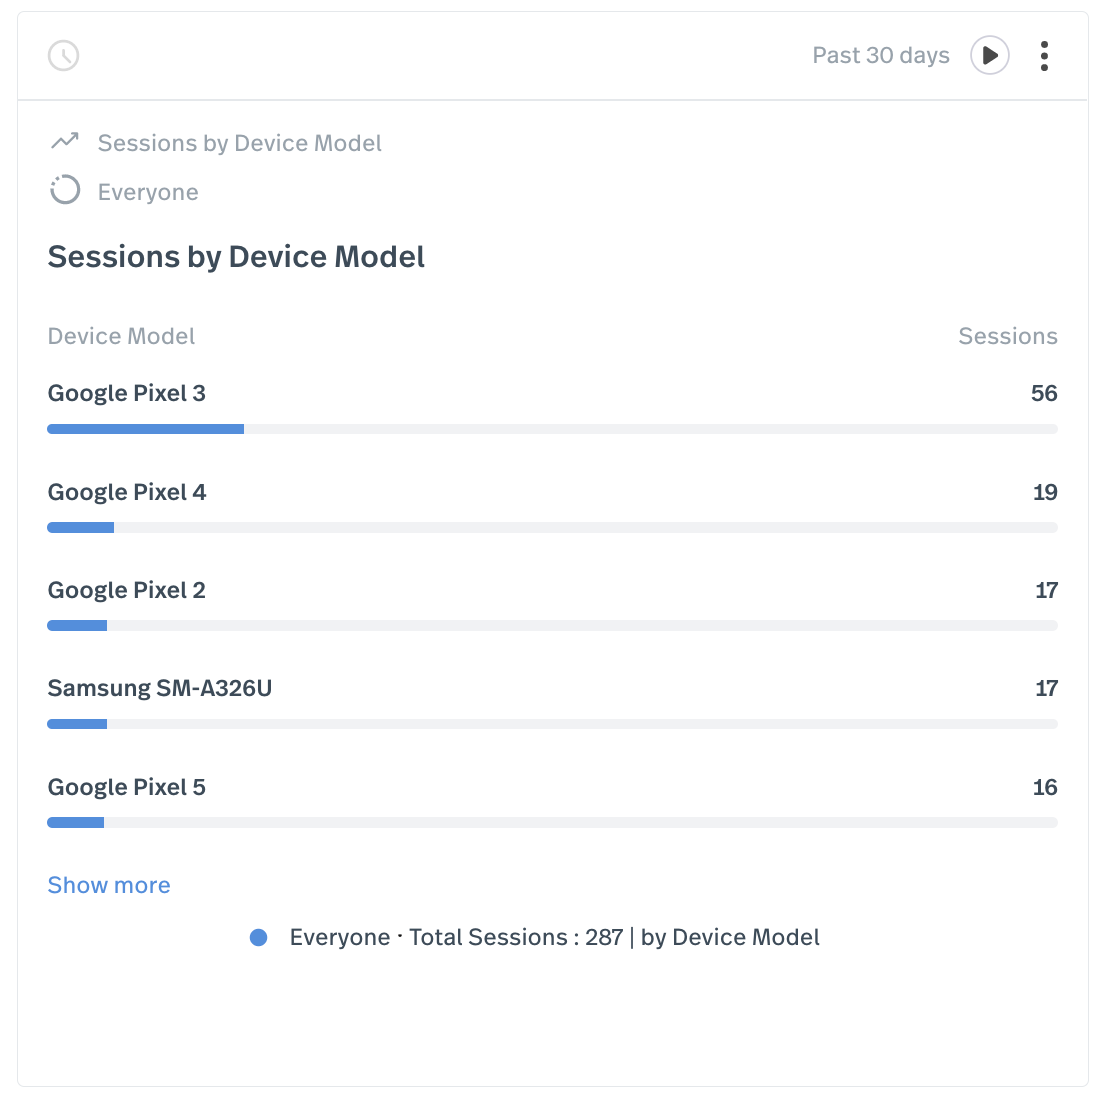 Sessions by Device Model